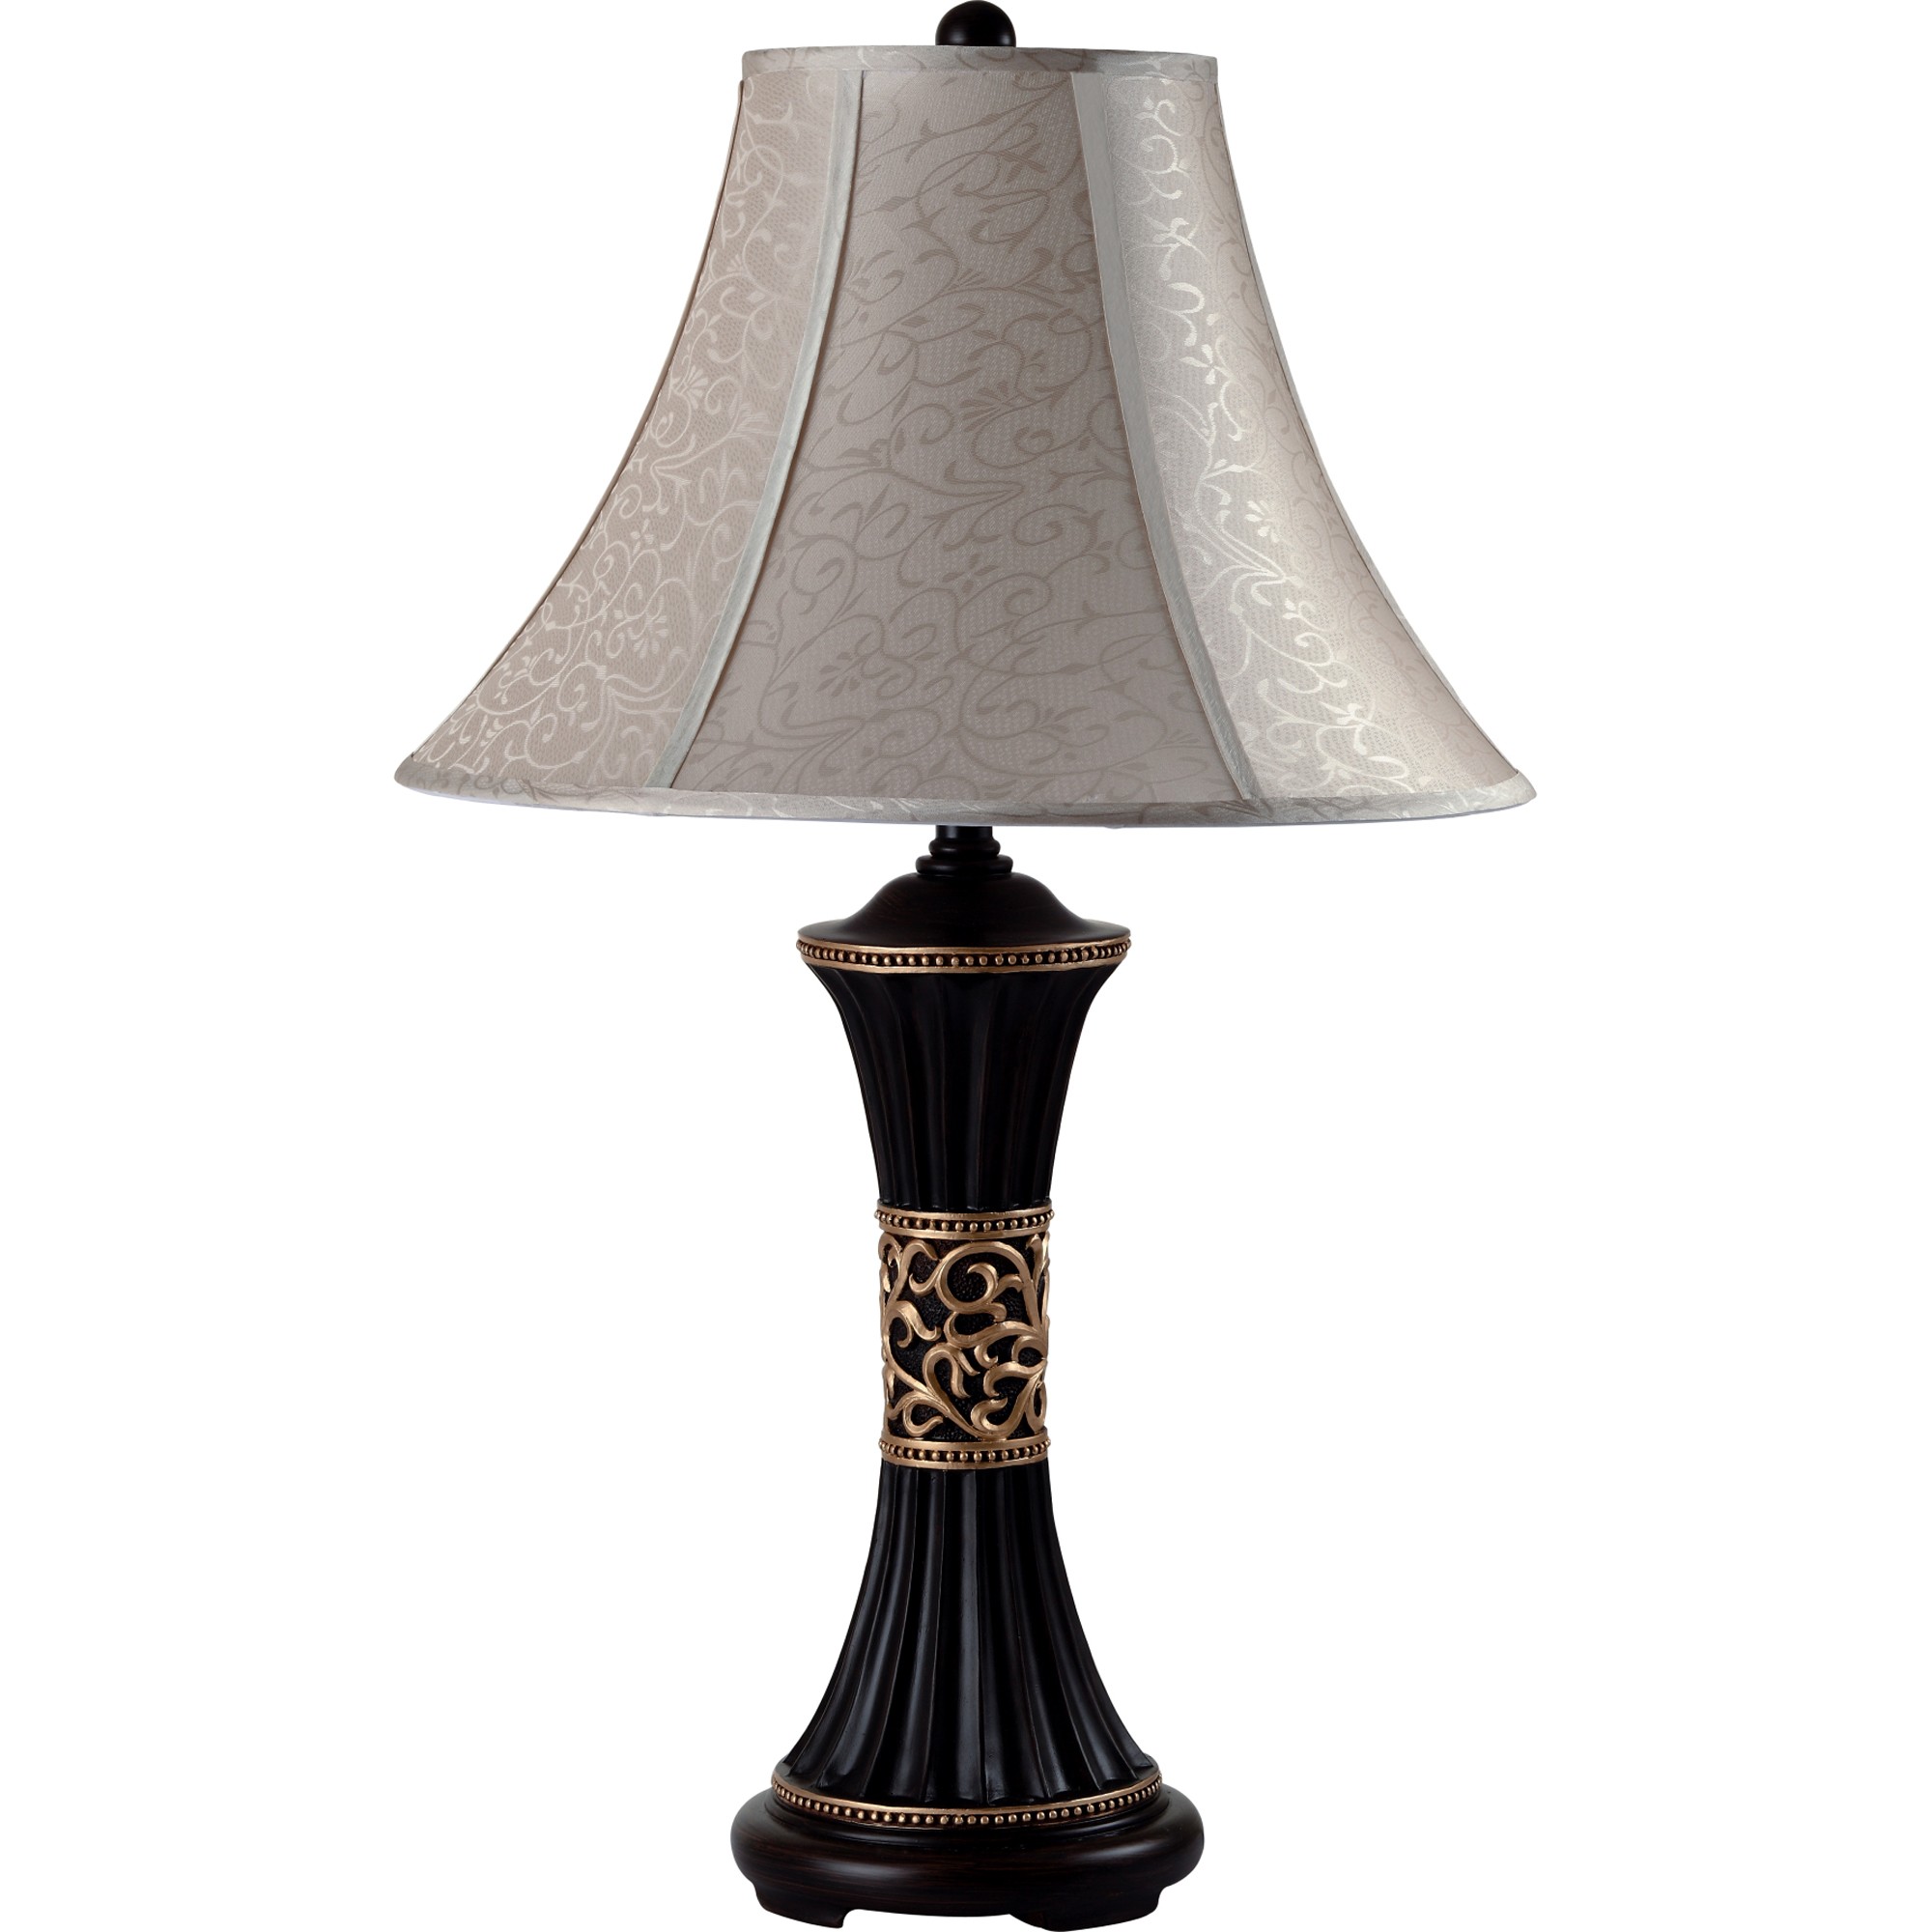 Black Table Lamp with Patterned Fabric Shade